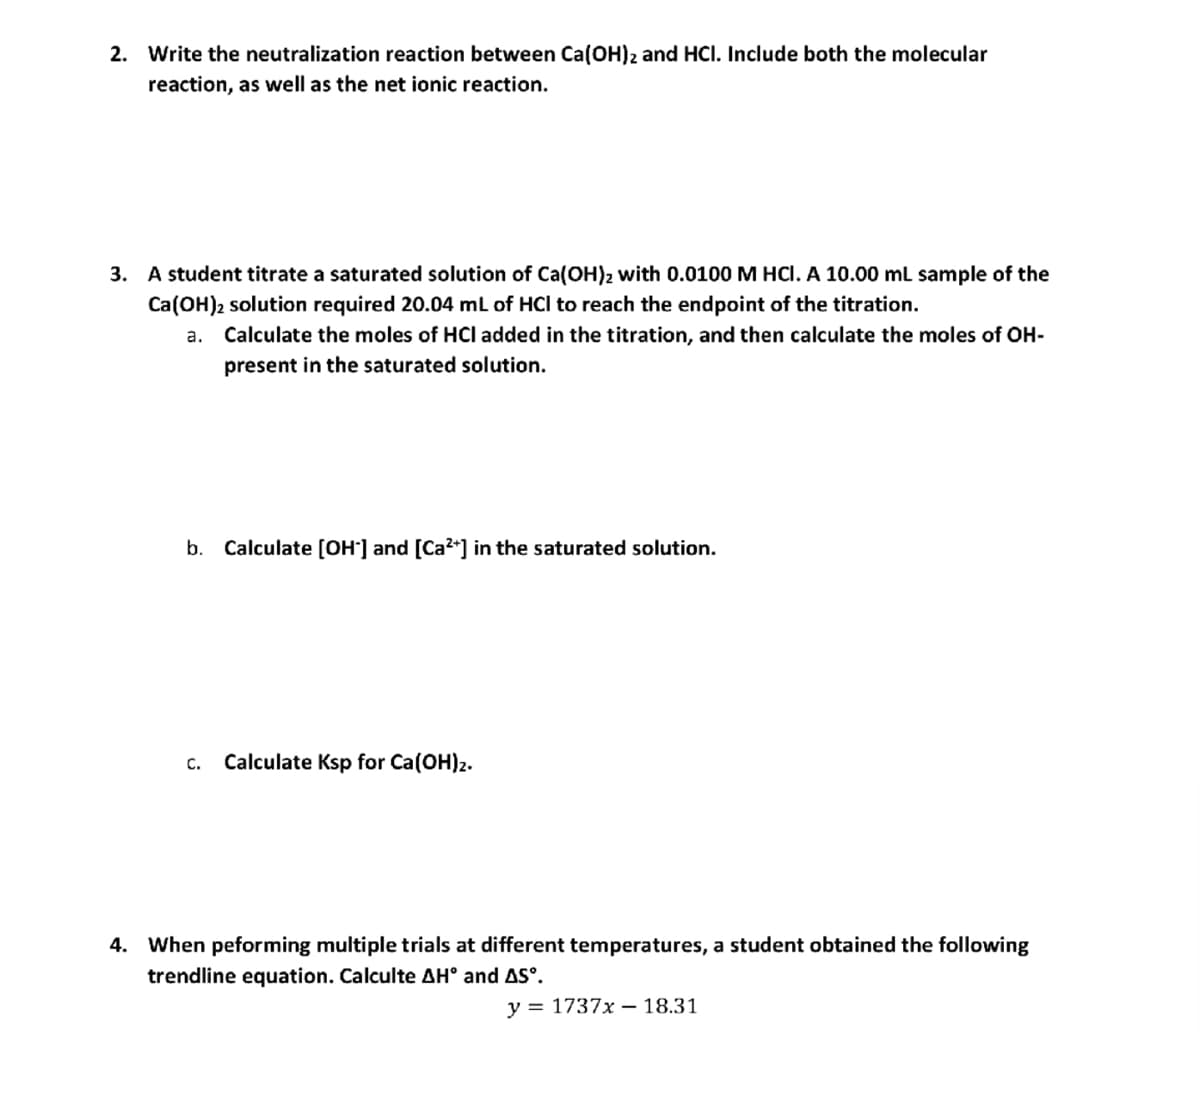 2. Write the neutralization reaction between Ca(OH)2 and HCI. Include both the molecular
reaction, as well as the net ionic reaction.
3. A student titrate a saturated solution of Ca(OH)₂ with 0.0100 M HCl. A 10.00 mL sample of the
Ca(OH)2 solution required 20.04 mL of HCI to reach the endpoint of the titration.
a. Calculate the moles of HCI added in the titration, and then calculate the moles of OH-
present in the saturated solution.
b. Calculate [OH-] and [Ca²+] in the saturated solution.
C. Calculate Ksp for Ca(OH)2.
4. When peforming multiple trials at different temperatures, a student obtained the following
trendline equation. Calculte AH° and AS°.
y = 1737x - 18.31